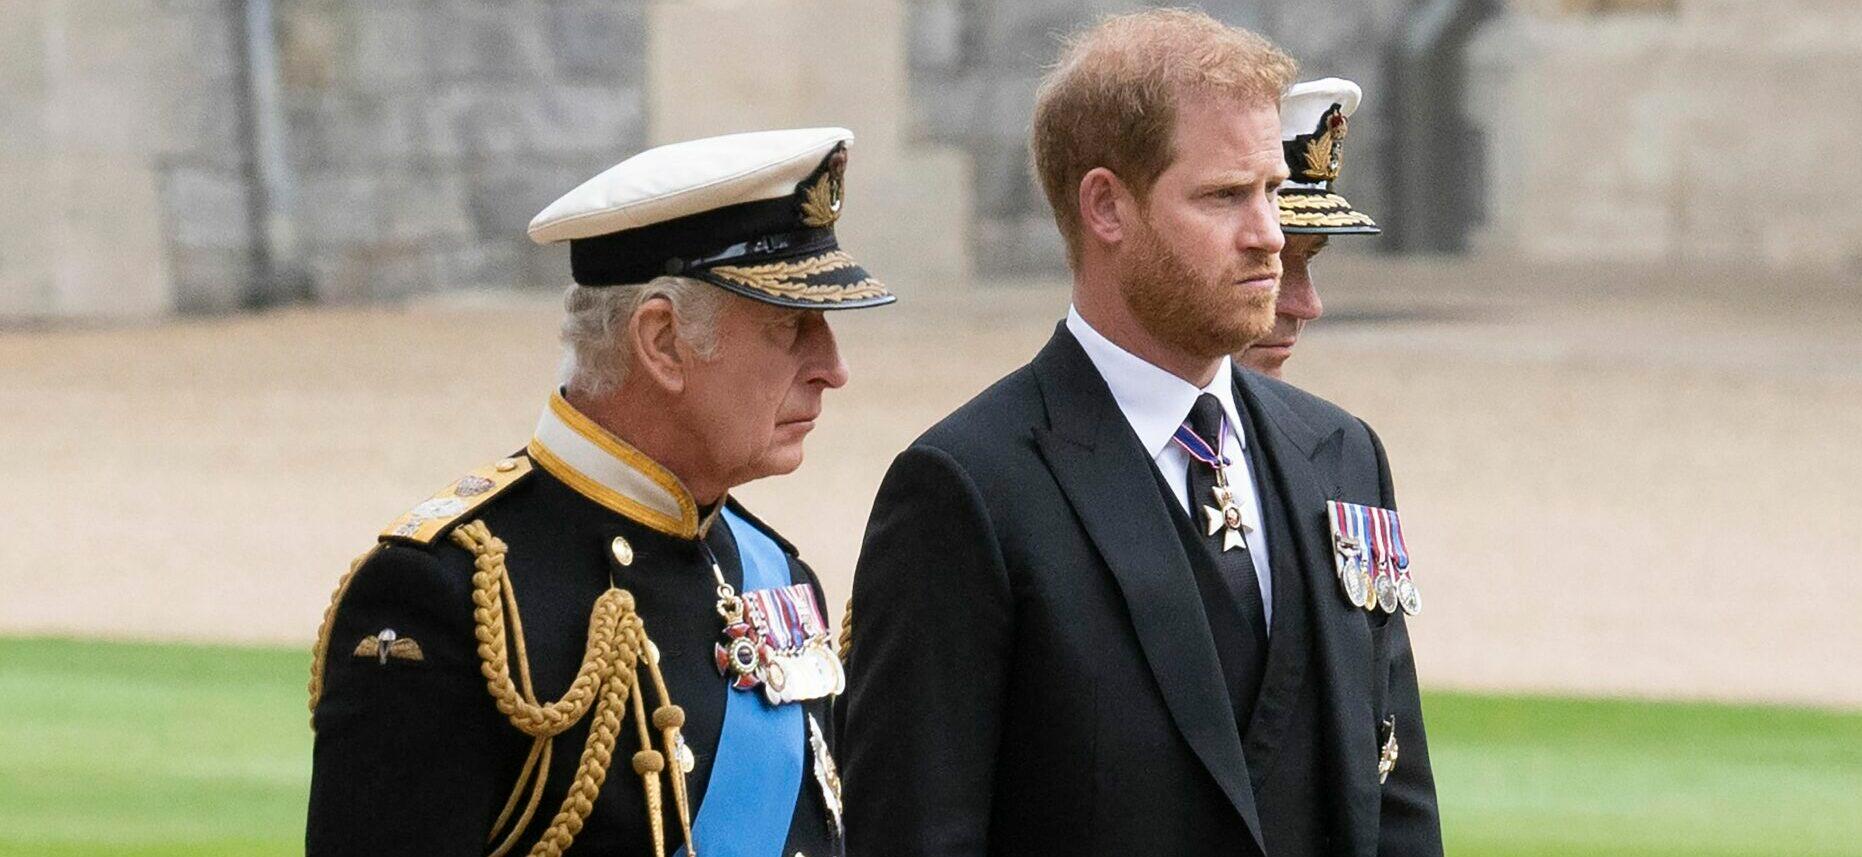 Prince Harry Fears His Family Will ‘NEVER Forgive’ Him Over His Bombshell Memoir ‘Spare’